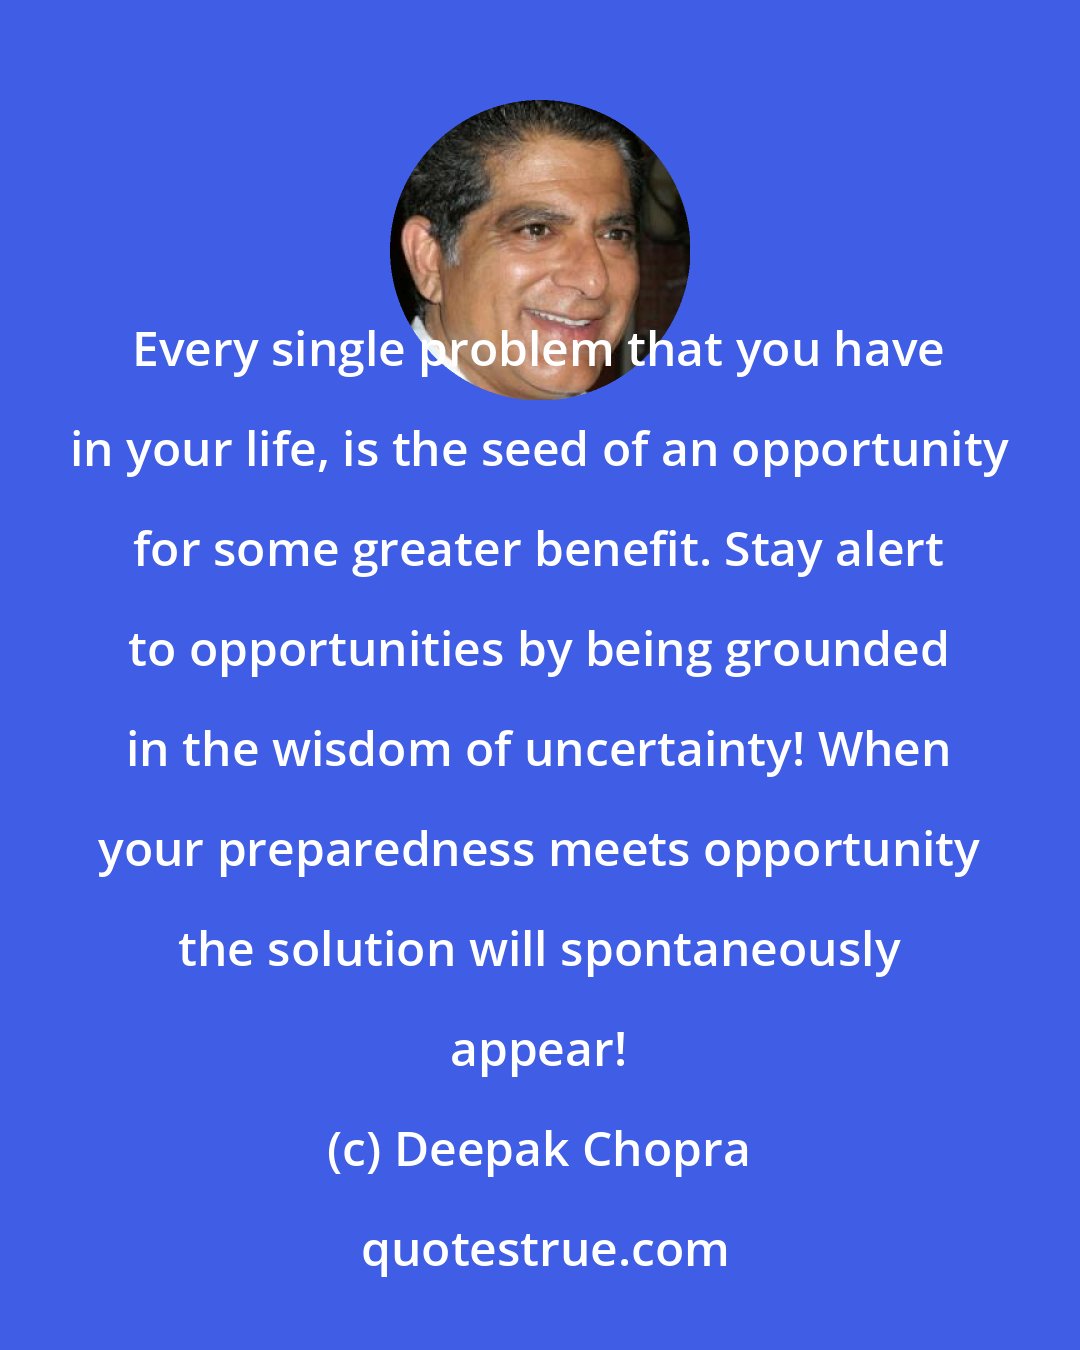 Deepak Chopra: Every single problem that you have in your life, is the seed of an opportunity for some greater benefit. Stay alert to opportunities by being grounded in the wisdom of uncertainty! When your preparedness meets opportunity the solution will spontaneously appear!